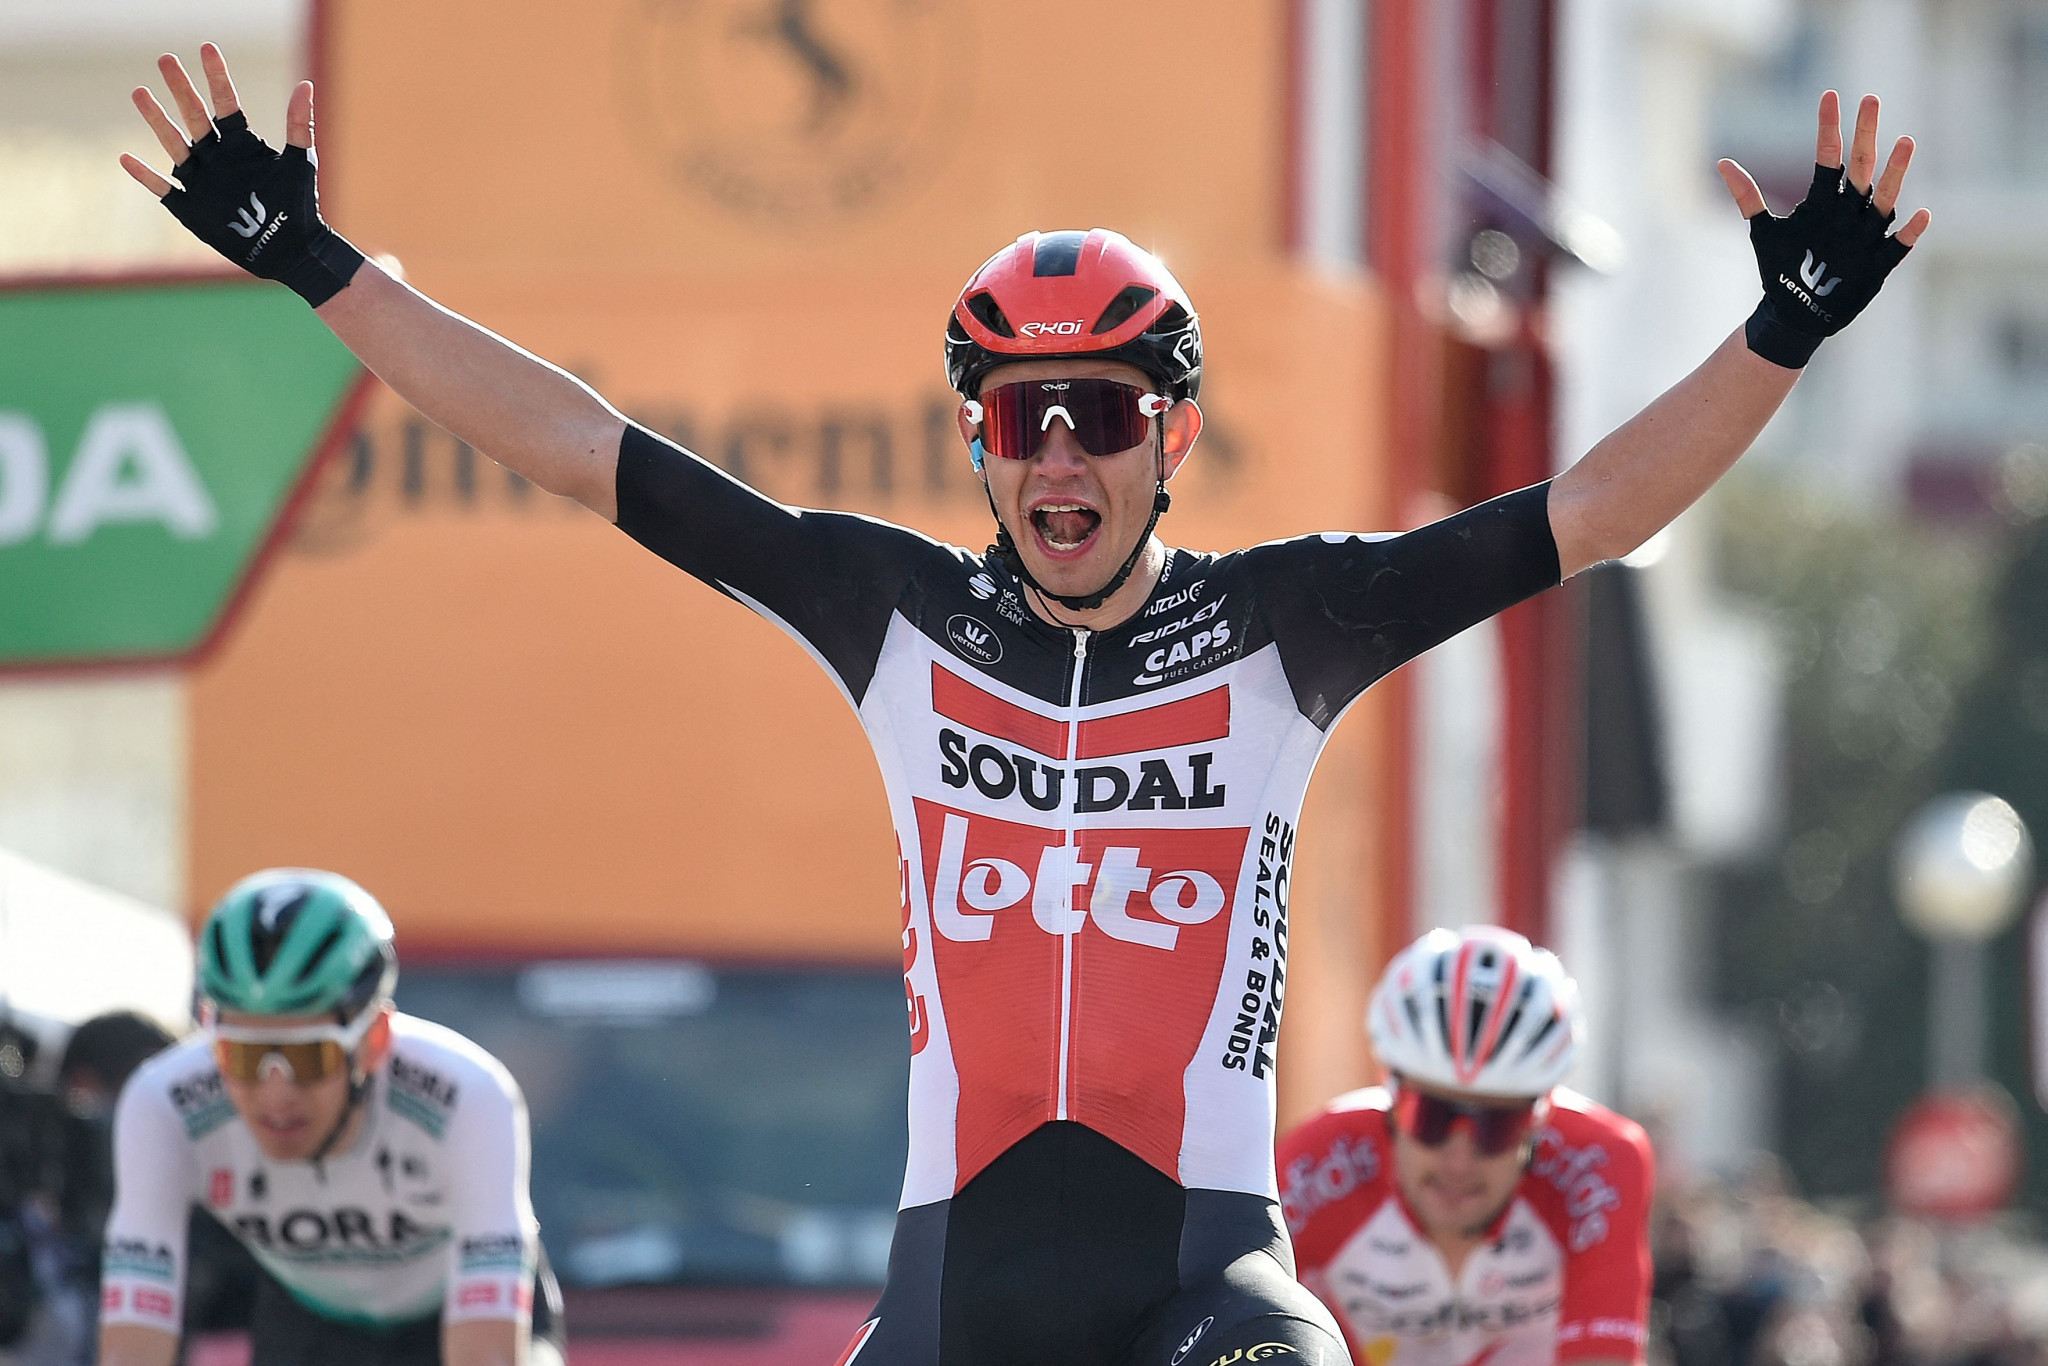 Kron triumphs from breakaway on opening stage of Volta a Catalunya